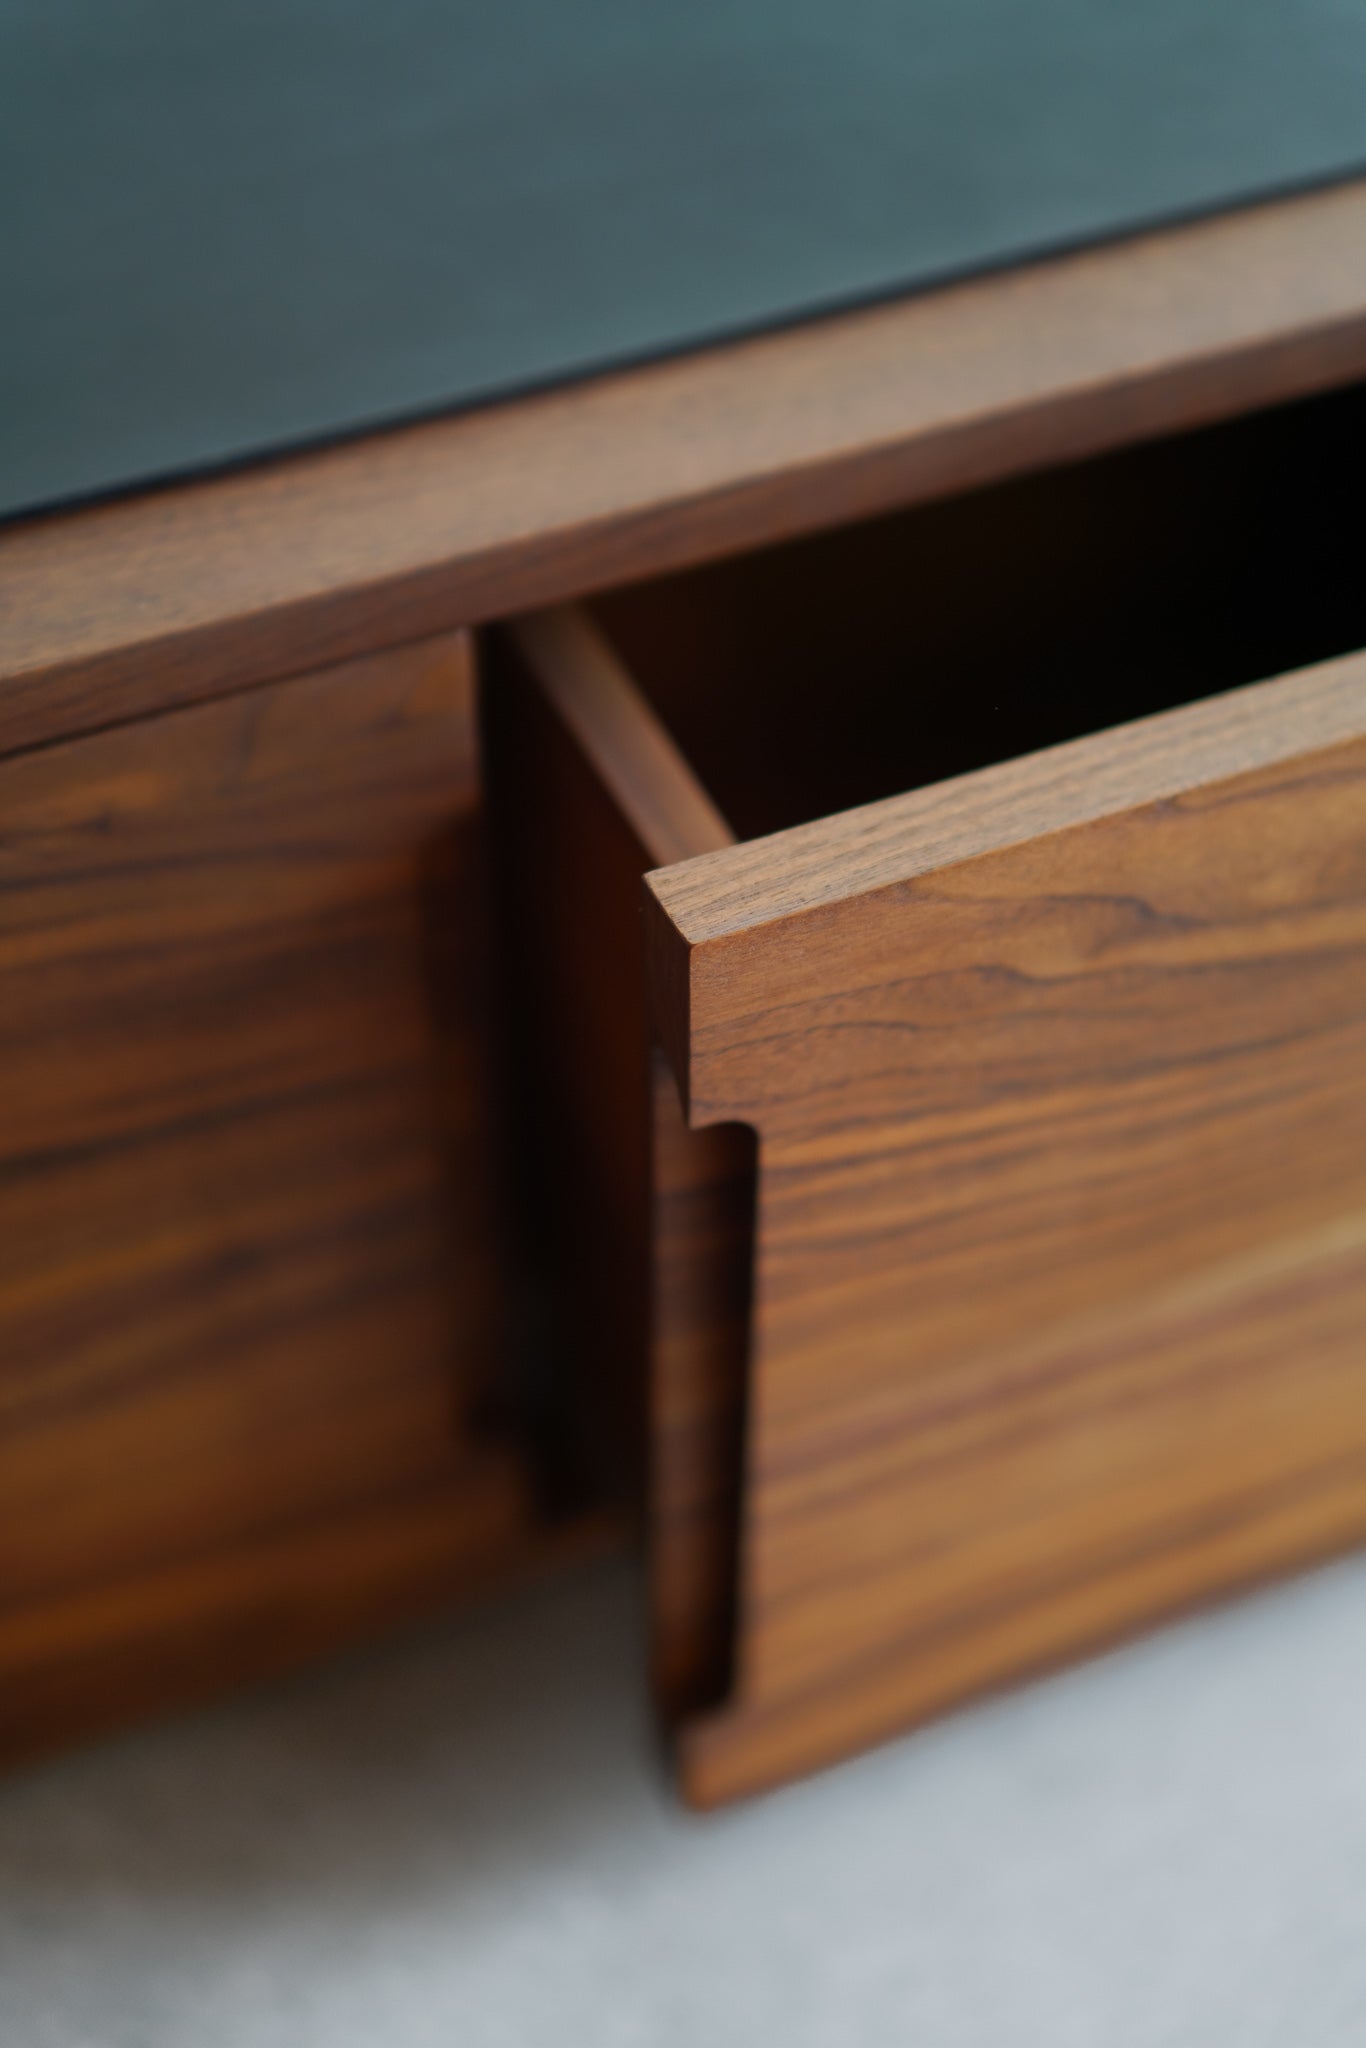 Carter storage cabinet - open drawer close up 